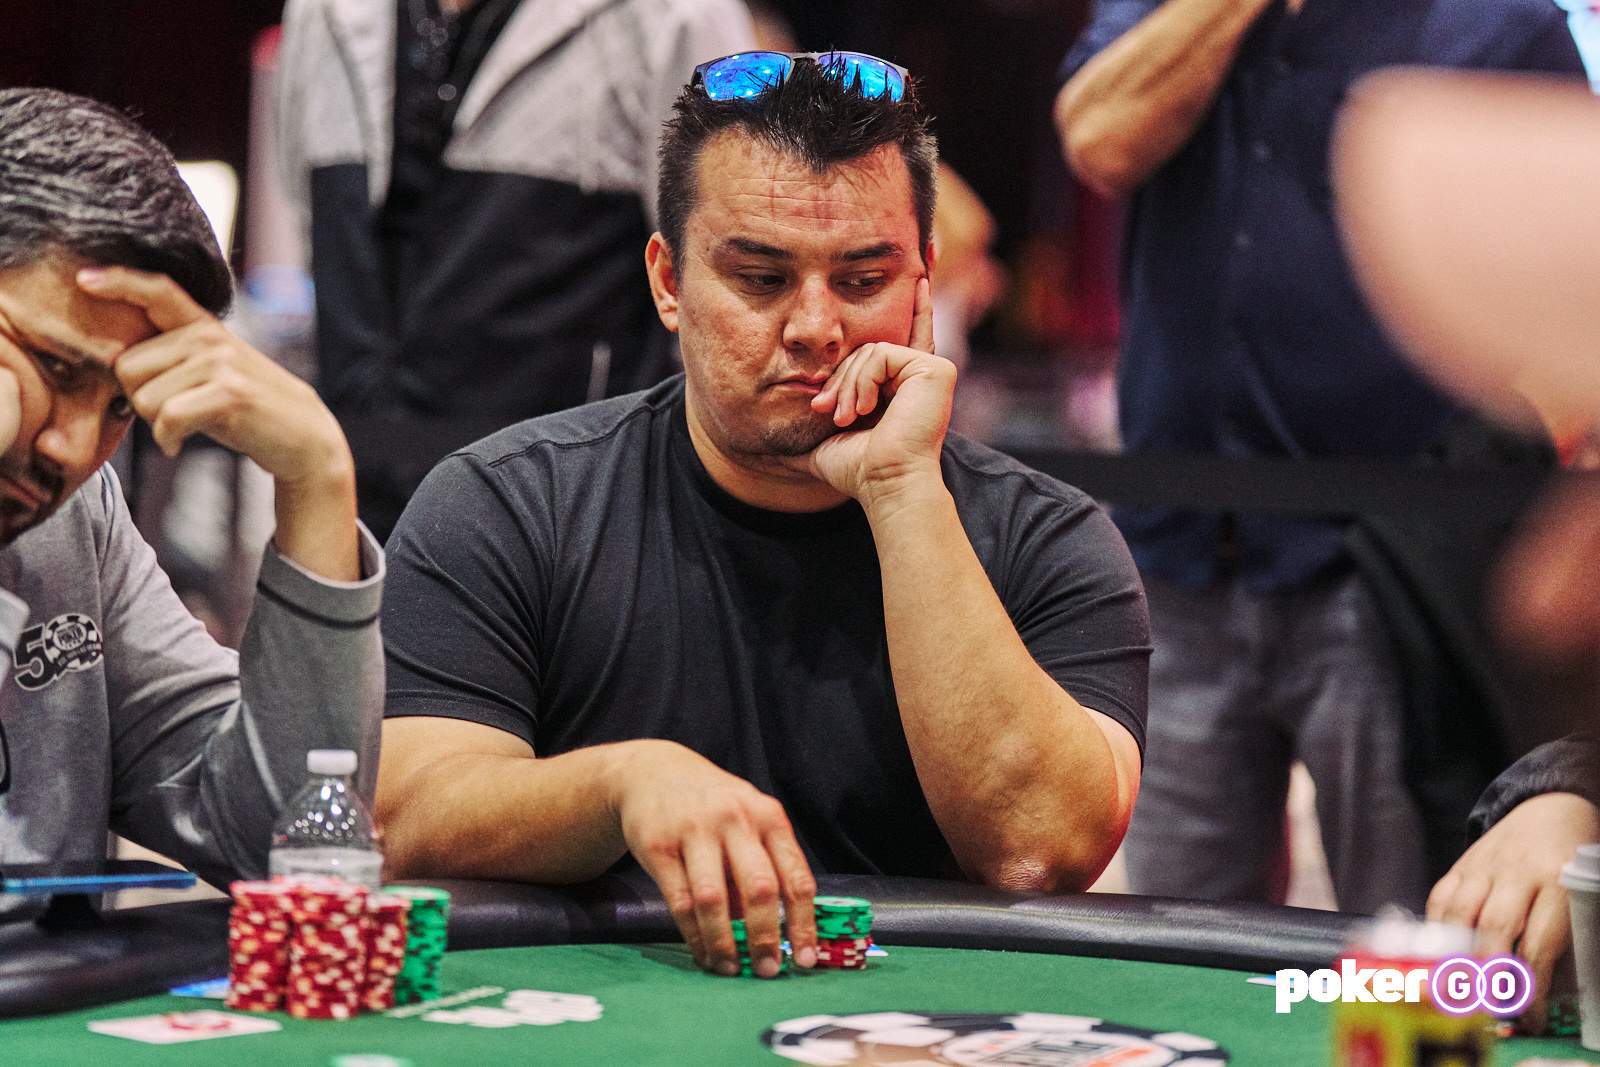 Derek Christensen Finds Big WSOP Main Event After Staying Out of Game for Mostly a Decade